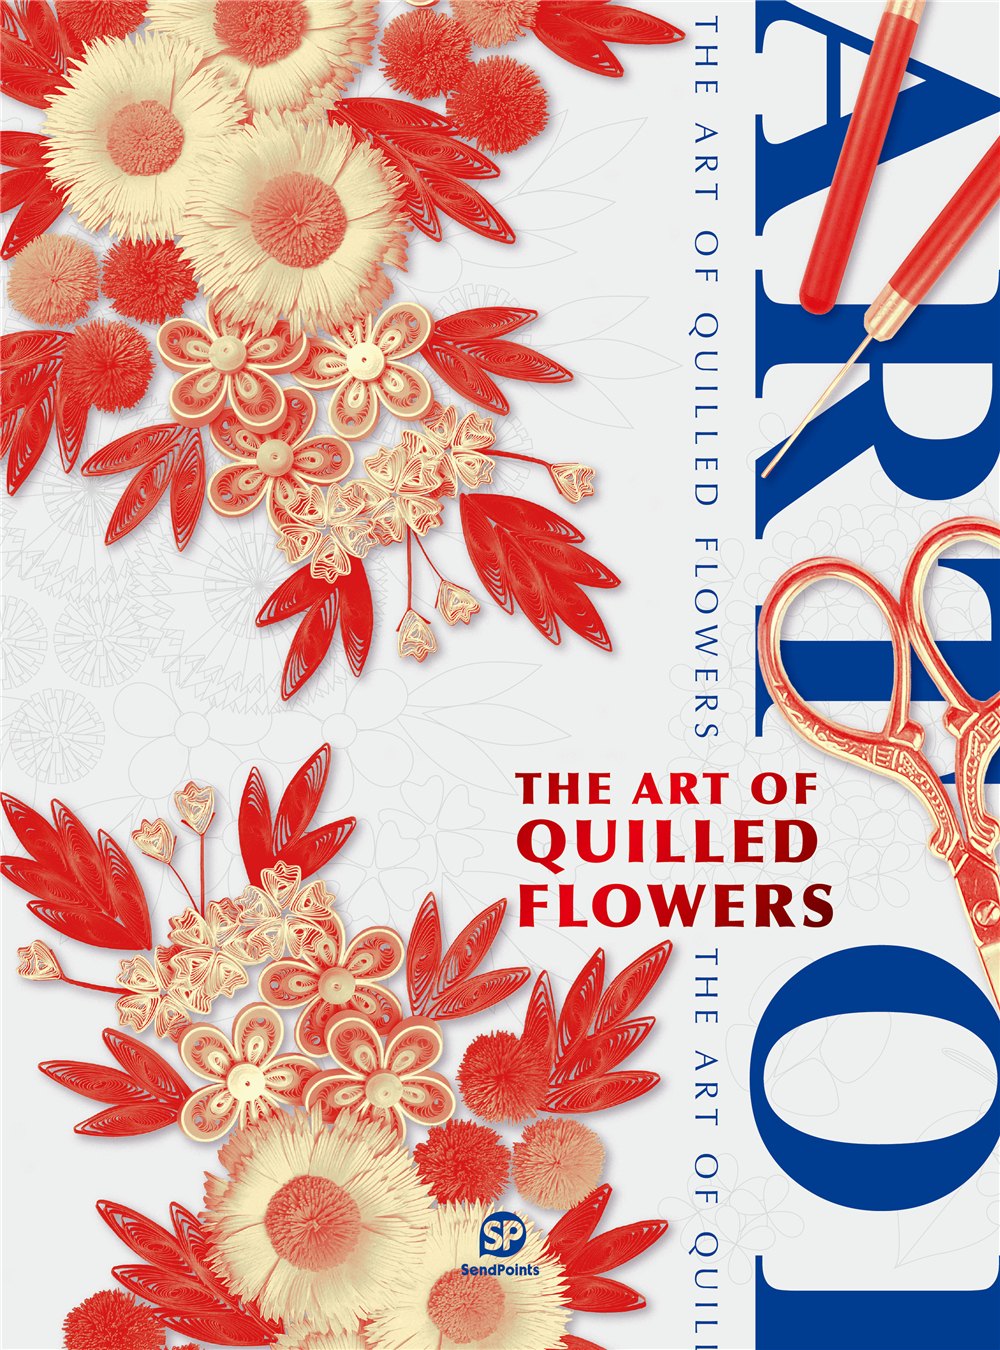 The Art of Quilled Flowers 衍纸花韵